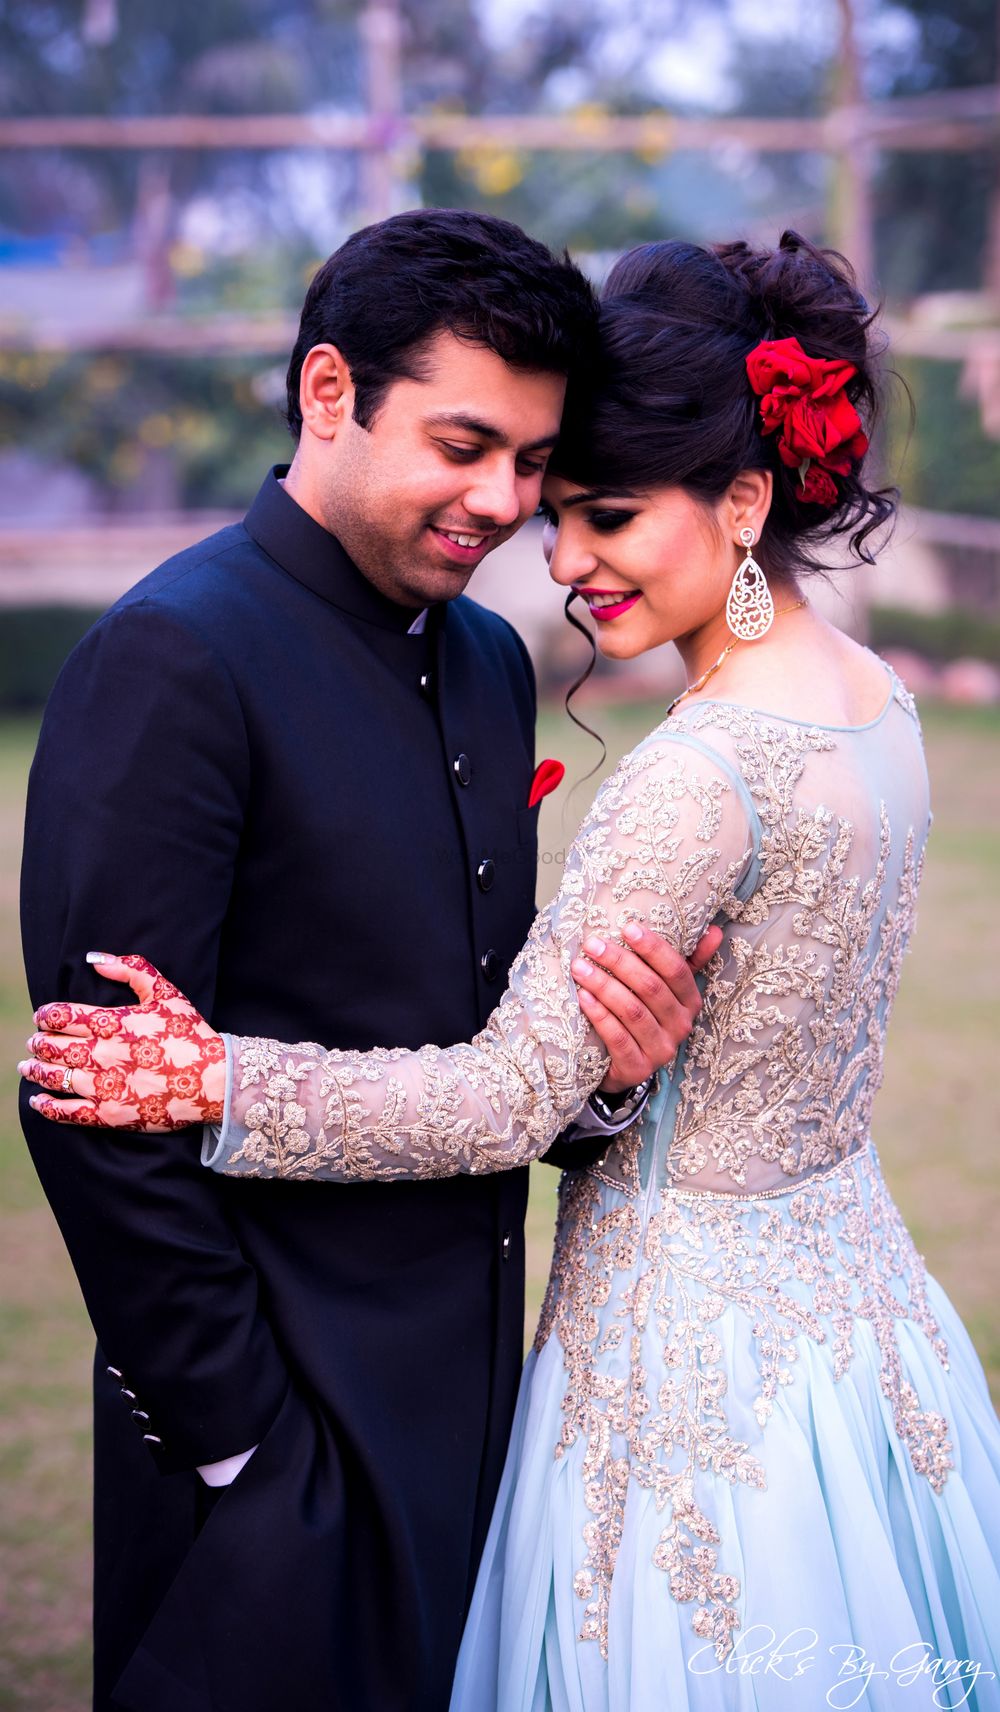 Photo of Engagement look with sheer pale blue gown and red roses in hair